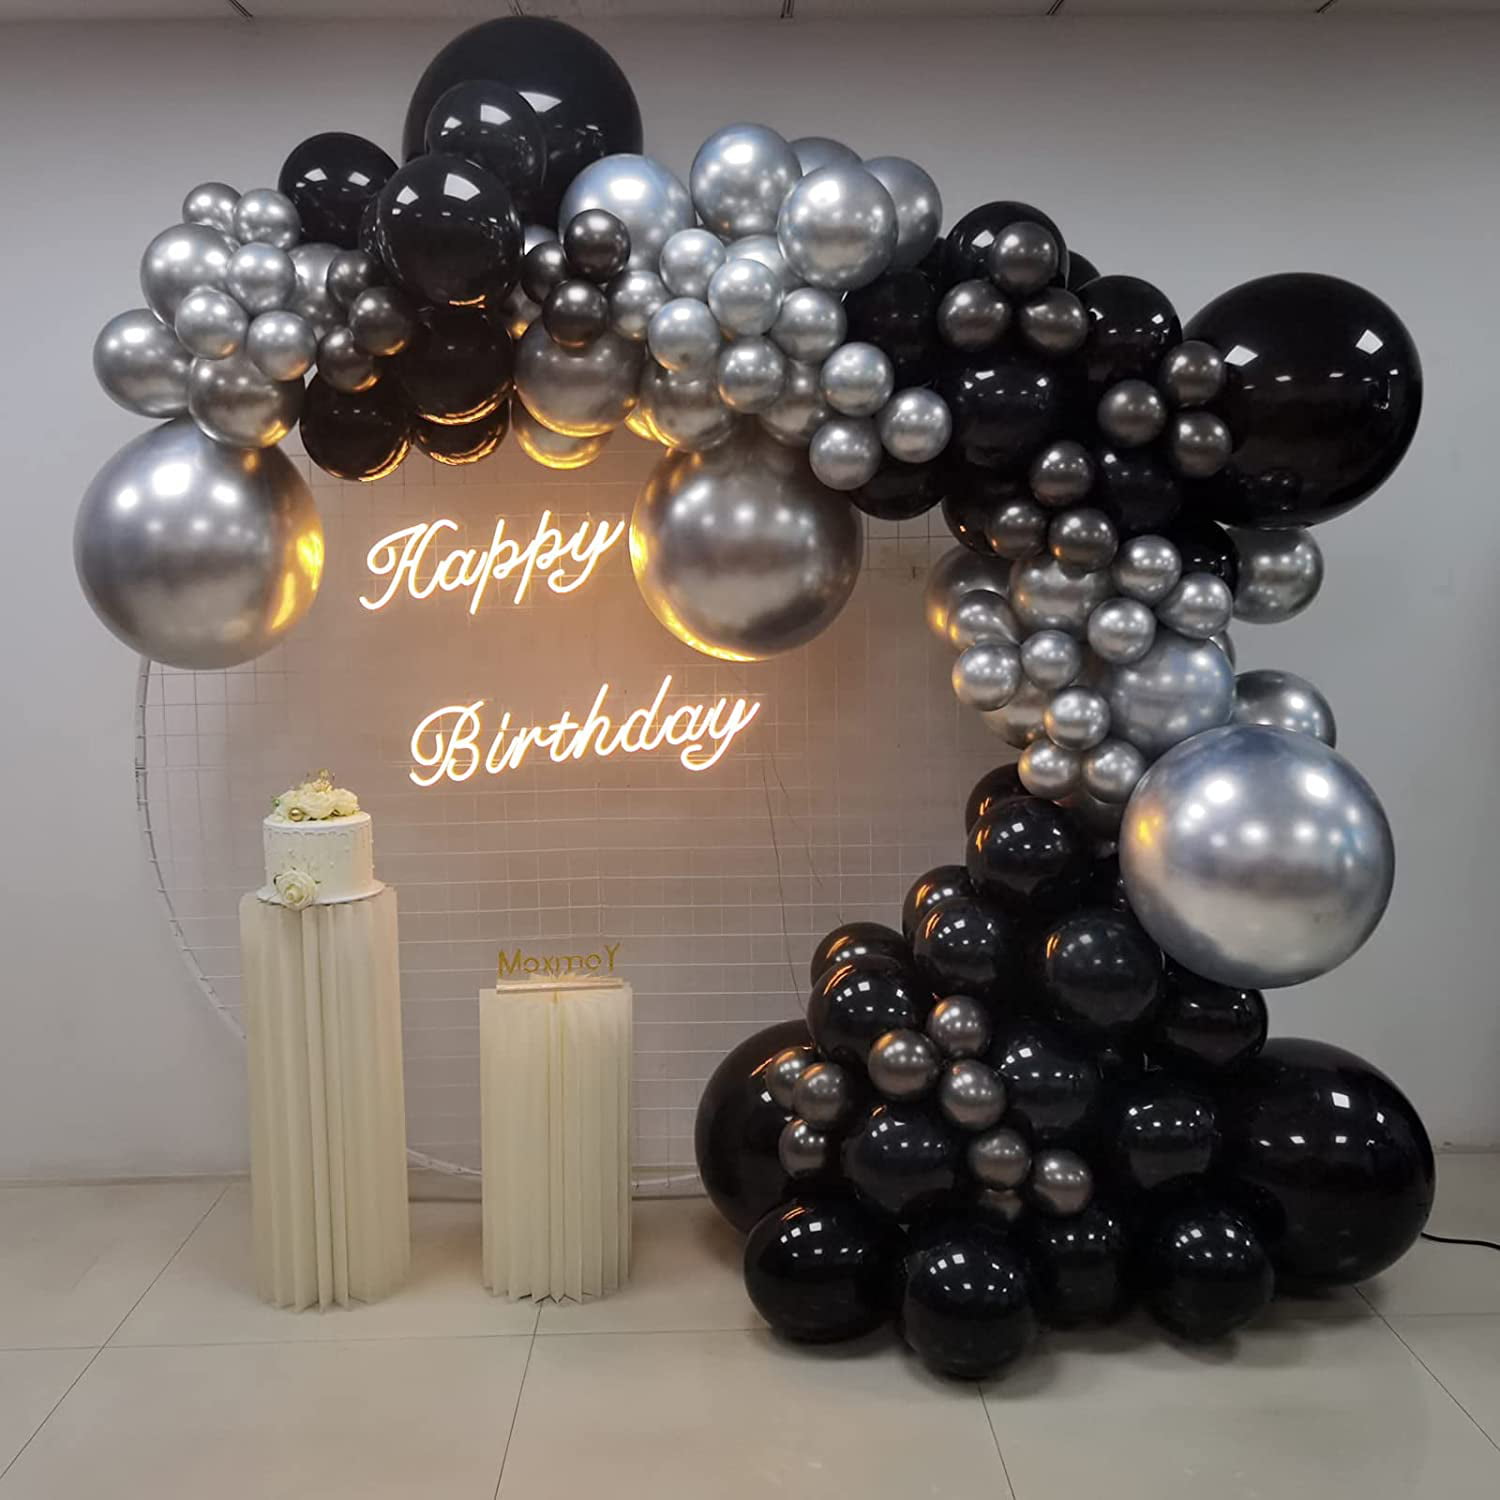 FEPITO 108 Pcs Black Silver Balloon Garland Arch Kit 5 10 12 18 Inches  Black Silver Confetti Balloons for Birthday Wedding Bridal Baby Shower